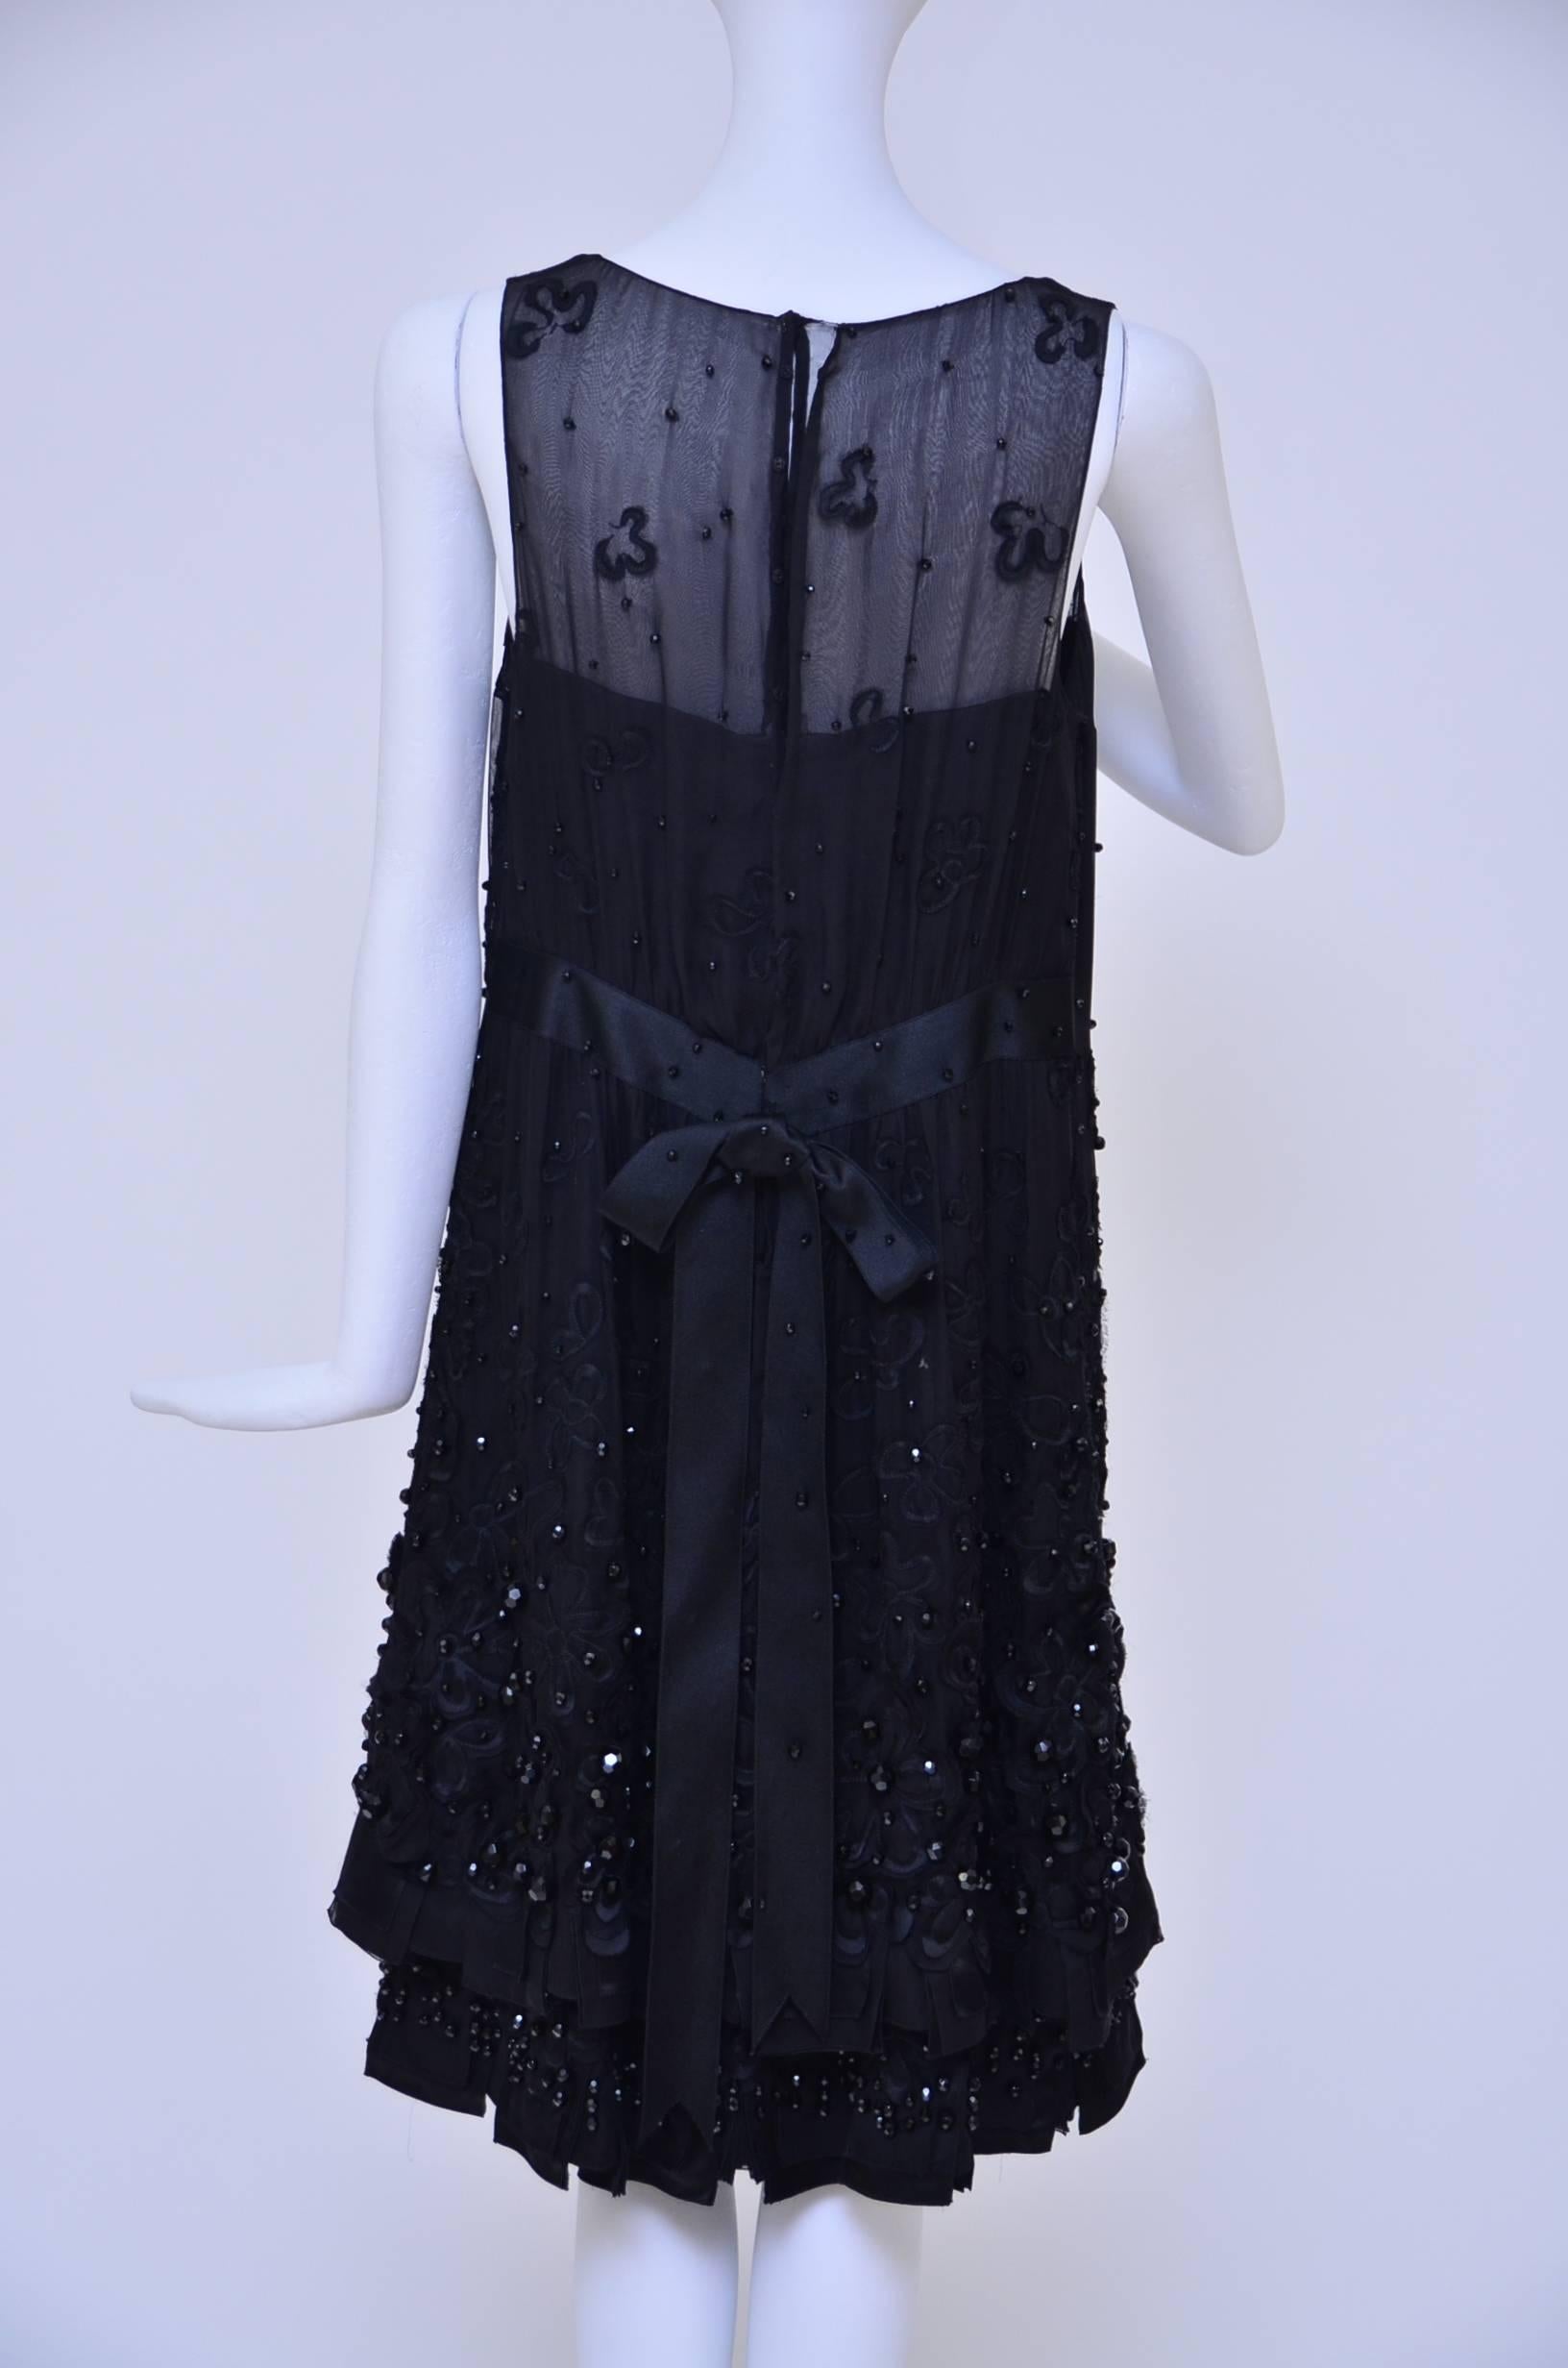 Beautiful Chanel Haute Couture black silk embellished/beaded dress.
Of course ,it was made for a very special Chanel client and it is absolutely beautiful in person.
Heavily beaded/embellished  with few different size of beads and  embroidered